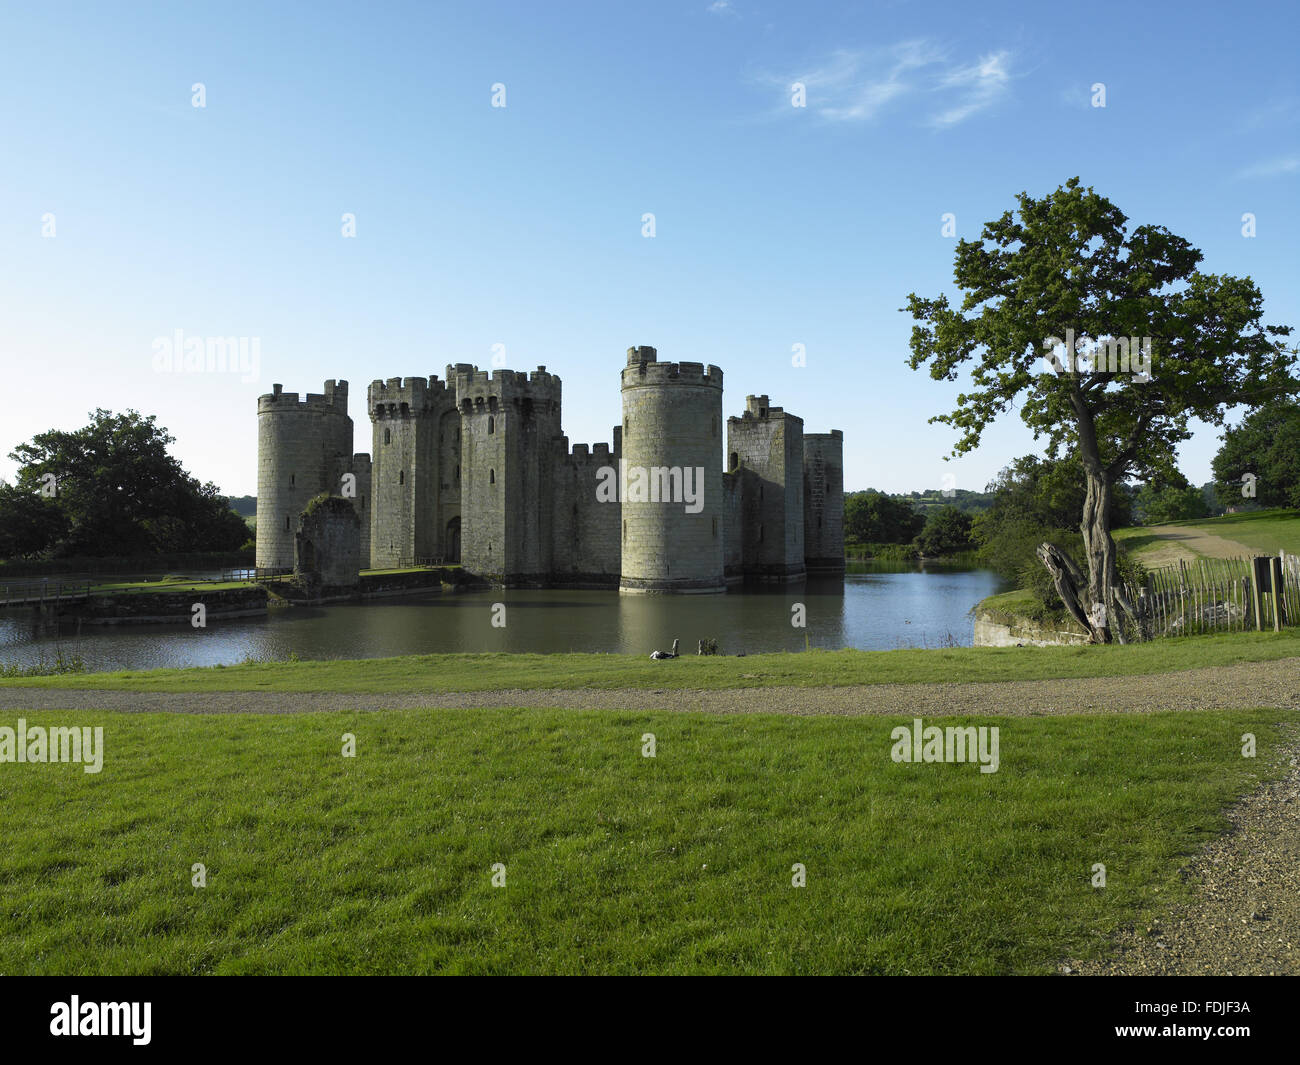 Bodiam Castle, East Sussex, built between 1385 and 1388. The castle replaced Sir Edward Dalyngrigge's manor house during the Hundred Years War when the French were able to attack across the Channel, and could reach Bodiam via the River Rother. Stock Photo